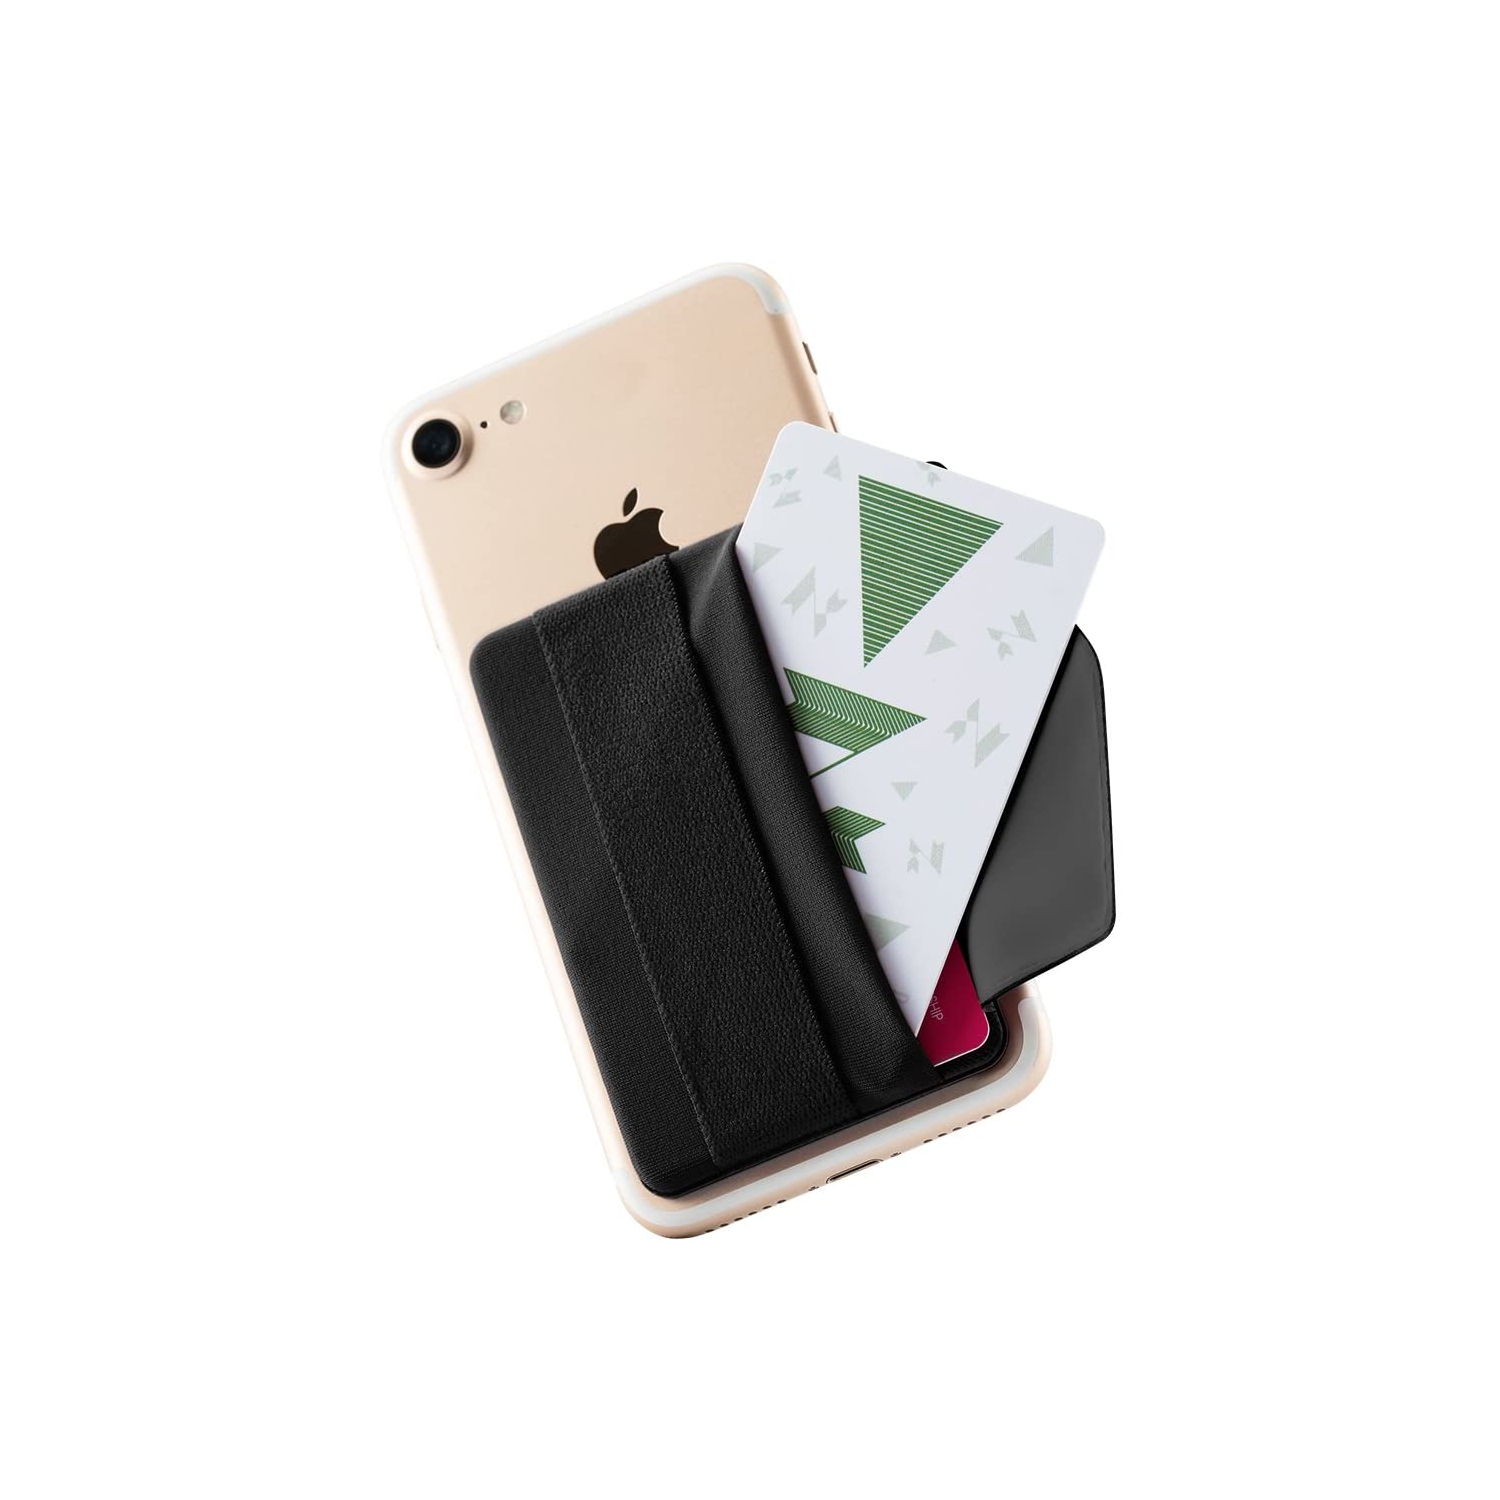 Phone Grip Credit Card Holder for Phone, Stick-On Phone Card Case, Secure Phone Finger Strap for iPhone Case.